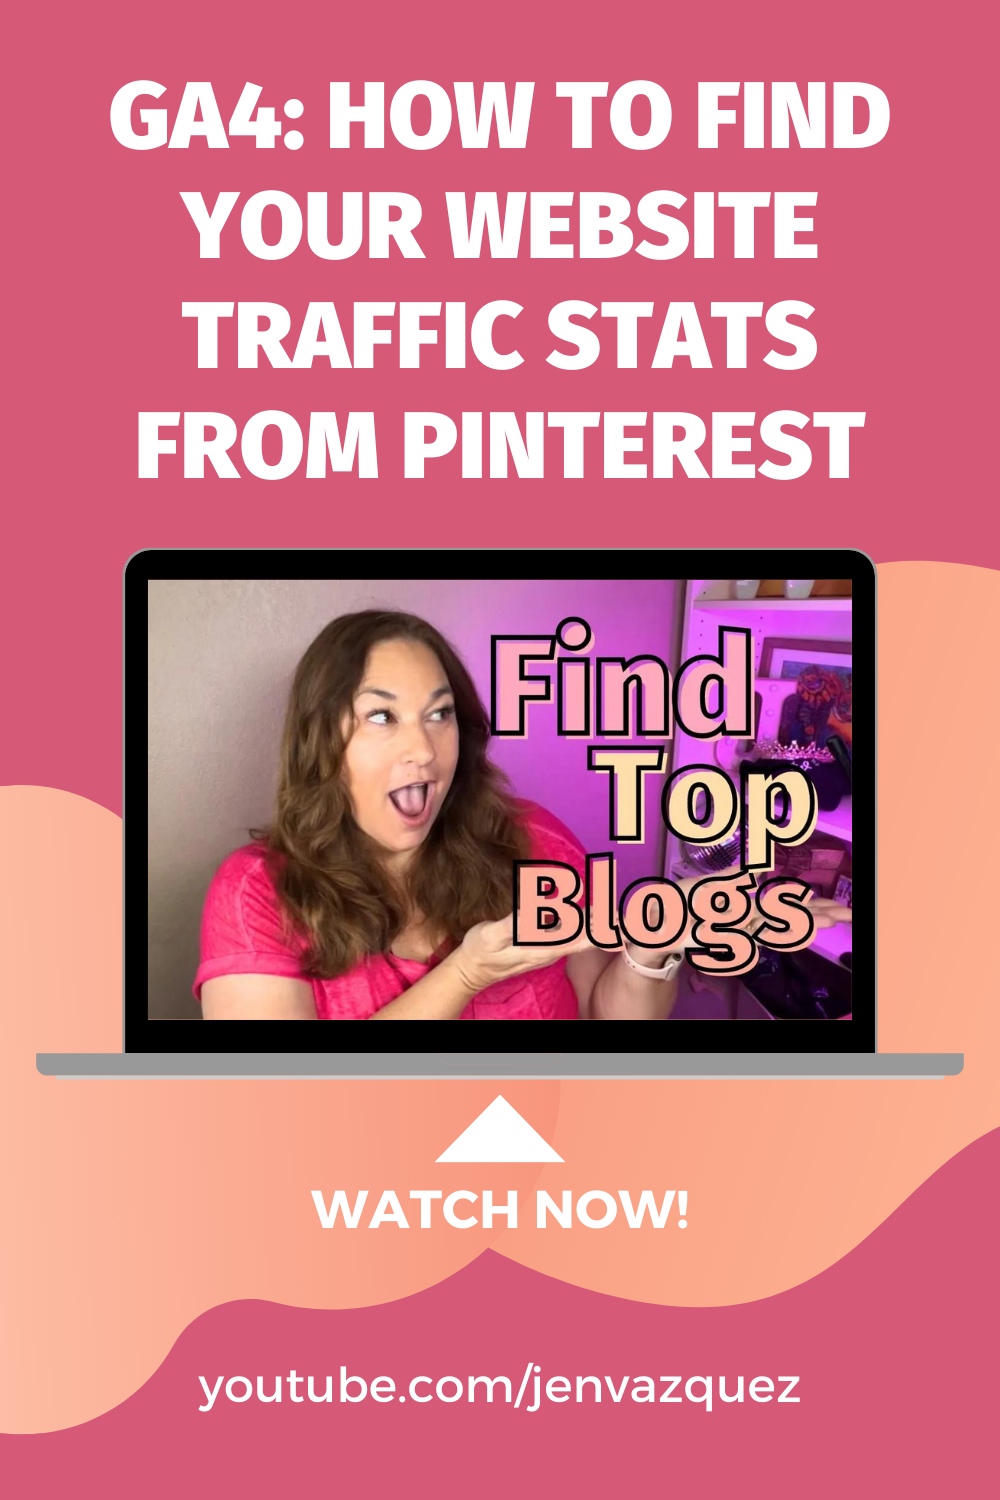 Top 10 rated youtube videos in 2023 helping with Pinterest and Marketing - Jen Vazquez Media